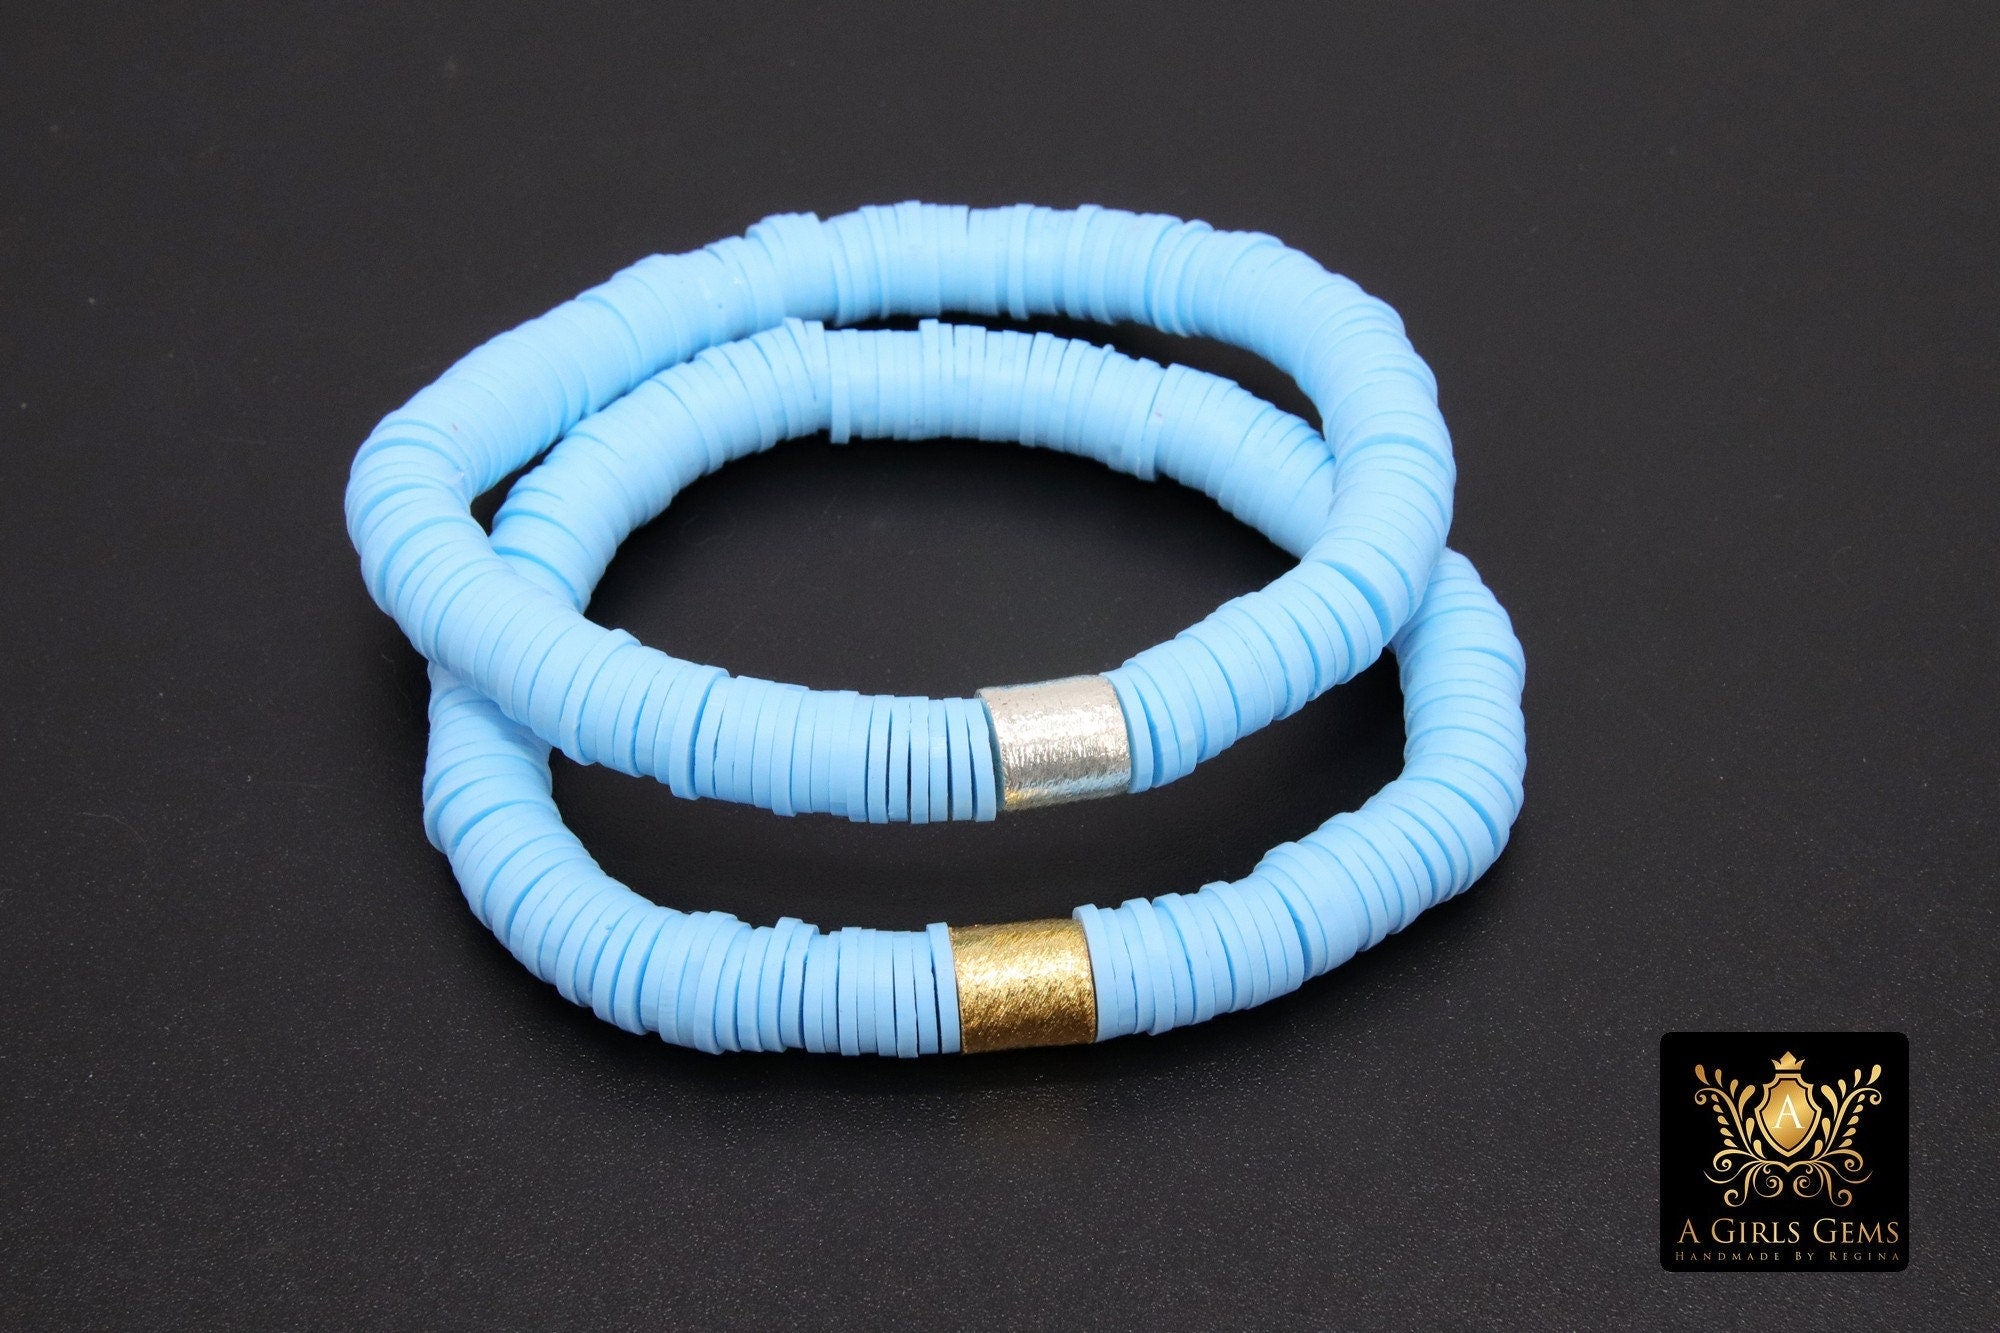 Men's Beaded Bracelet With Light Blue And Silver Disc Beads